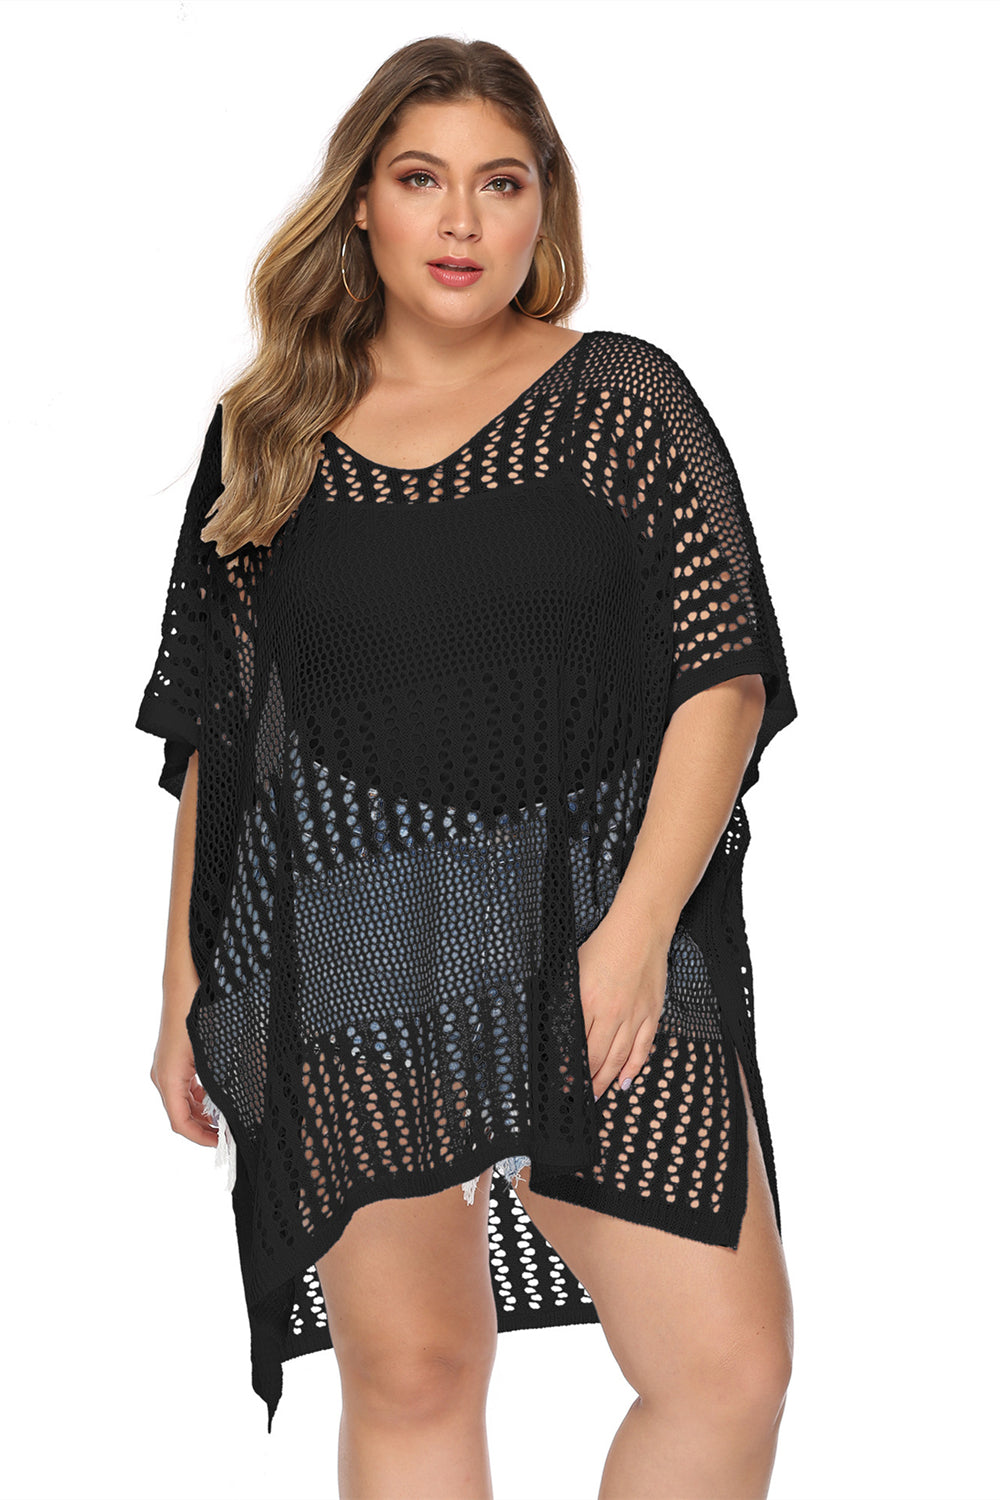 Sexy Plus Size Hollow Out Crochet Cover Ups